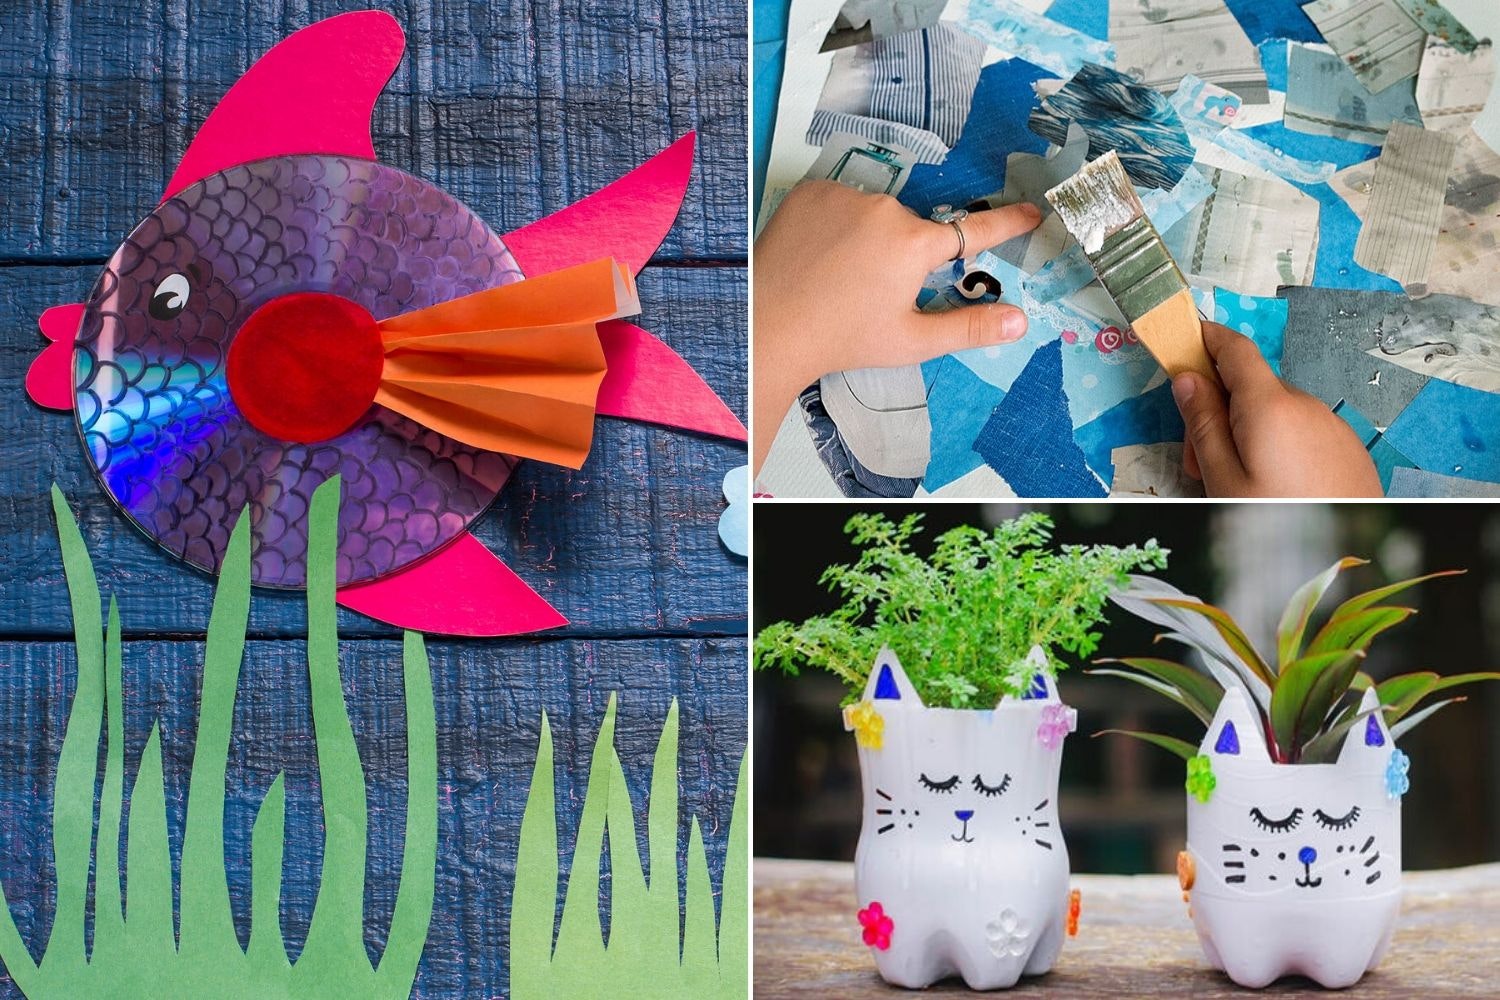 1. Creative Crafts: Upcycling Everyday Items into Stunning Art